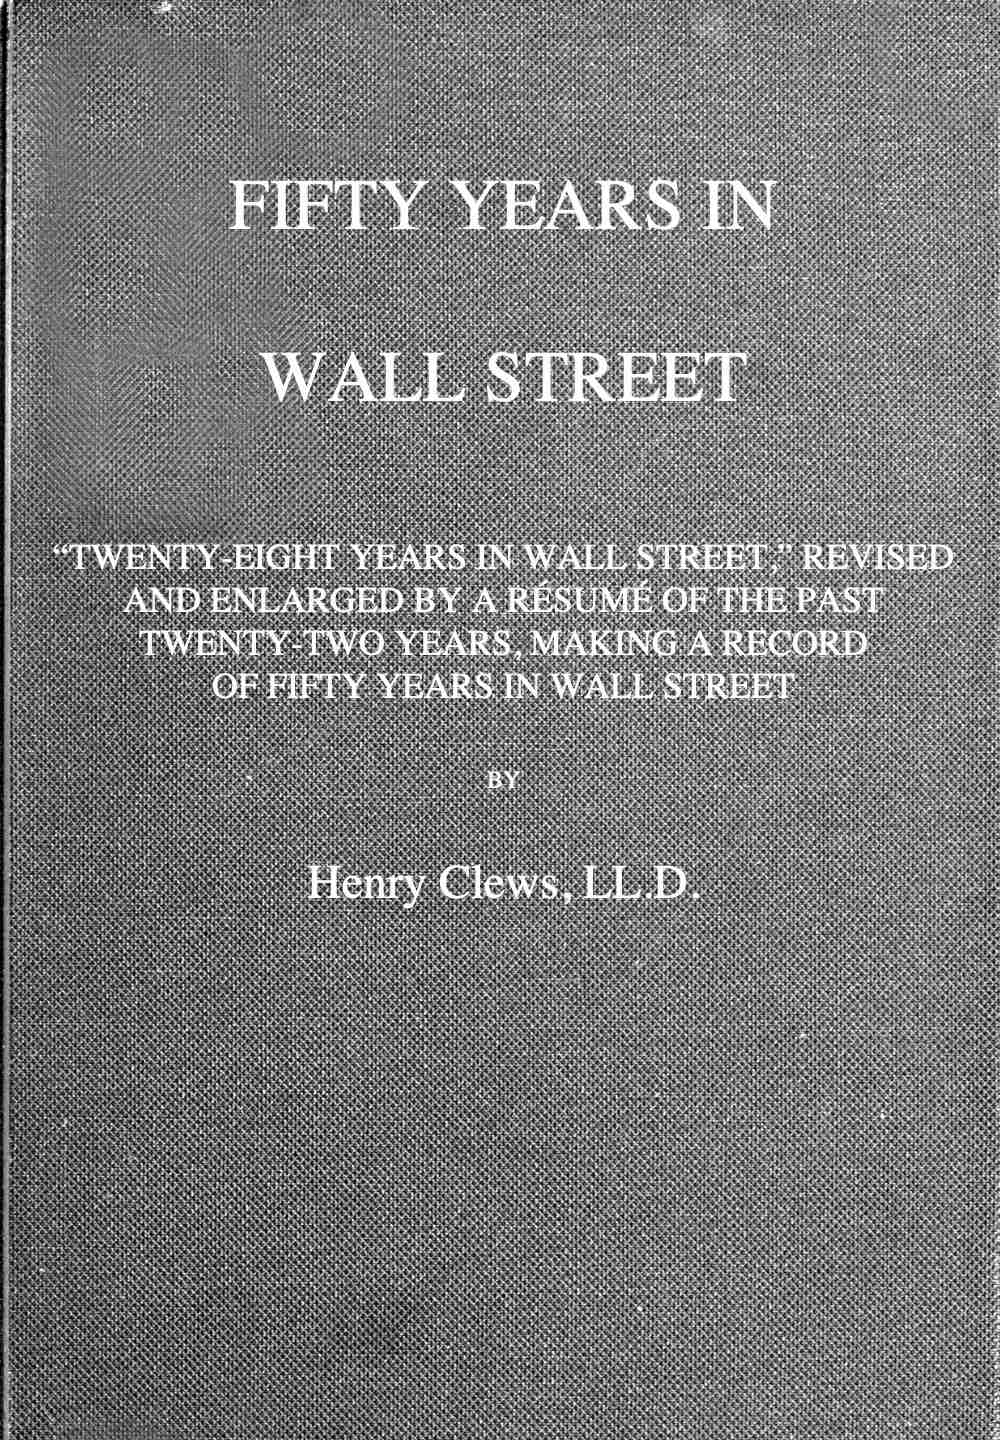 Fifty Years in Wall Street Henry Clews, LL.D.